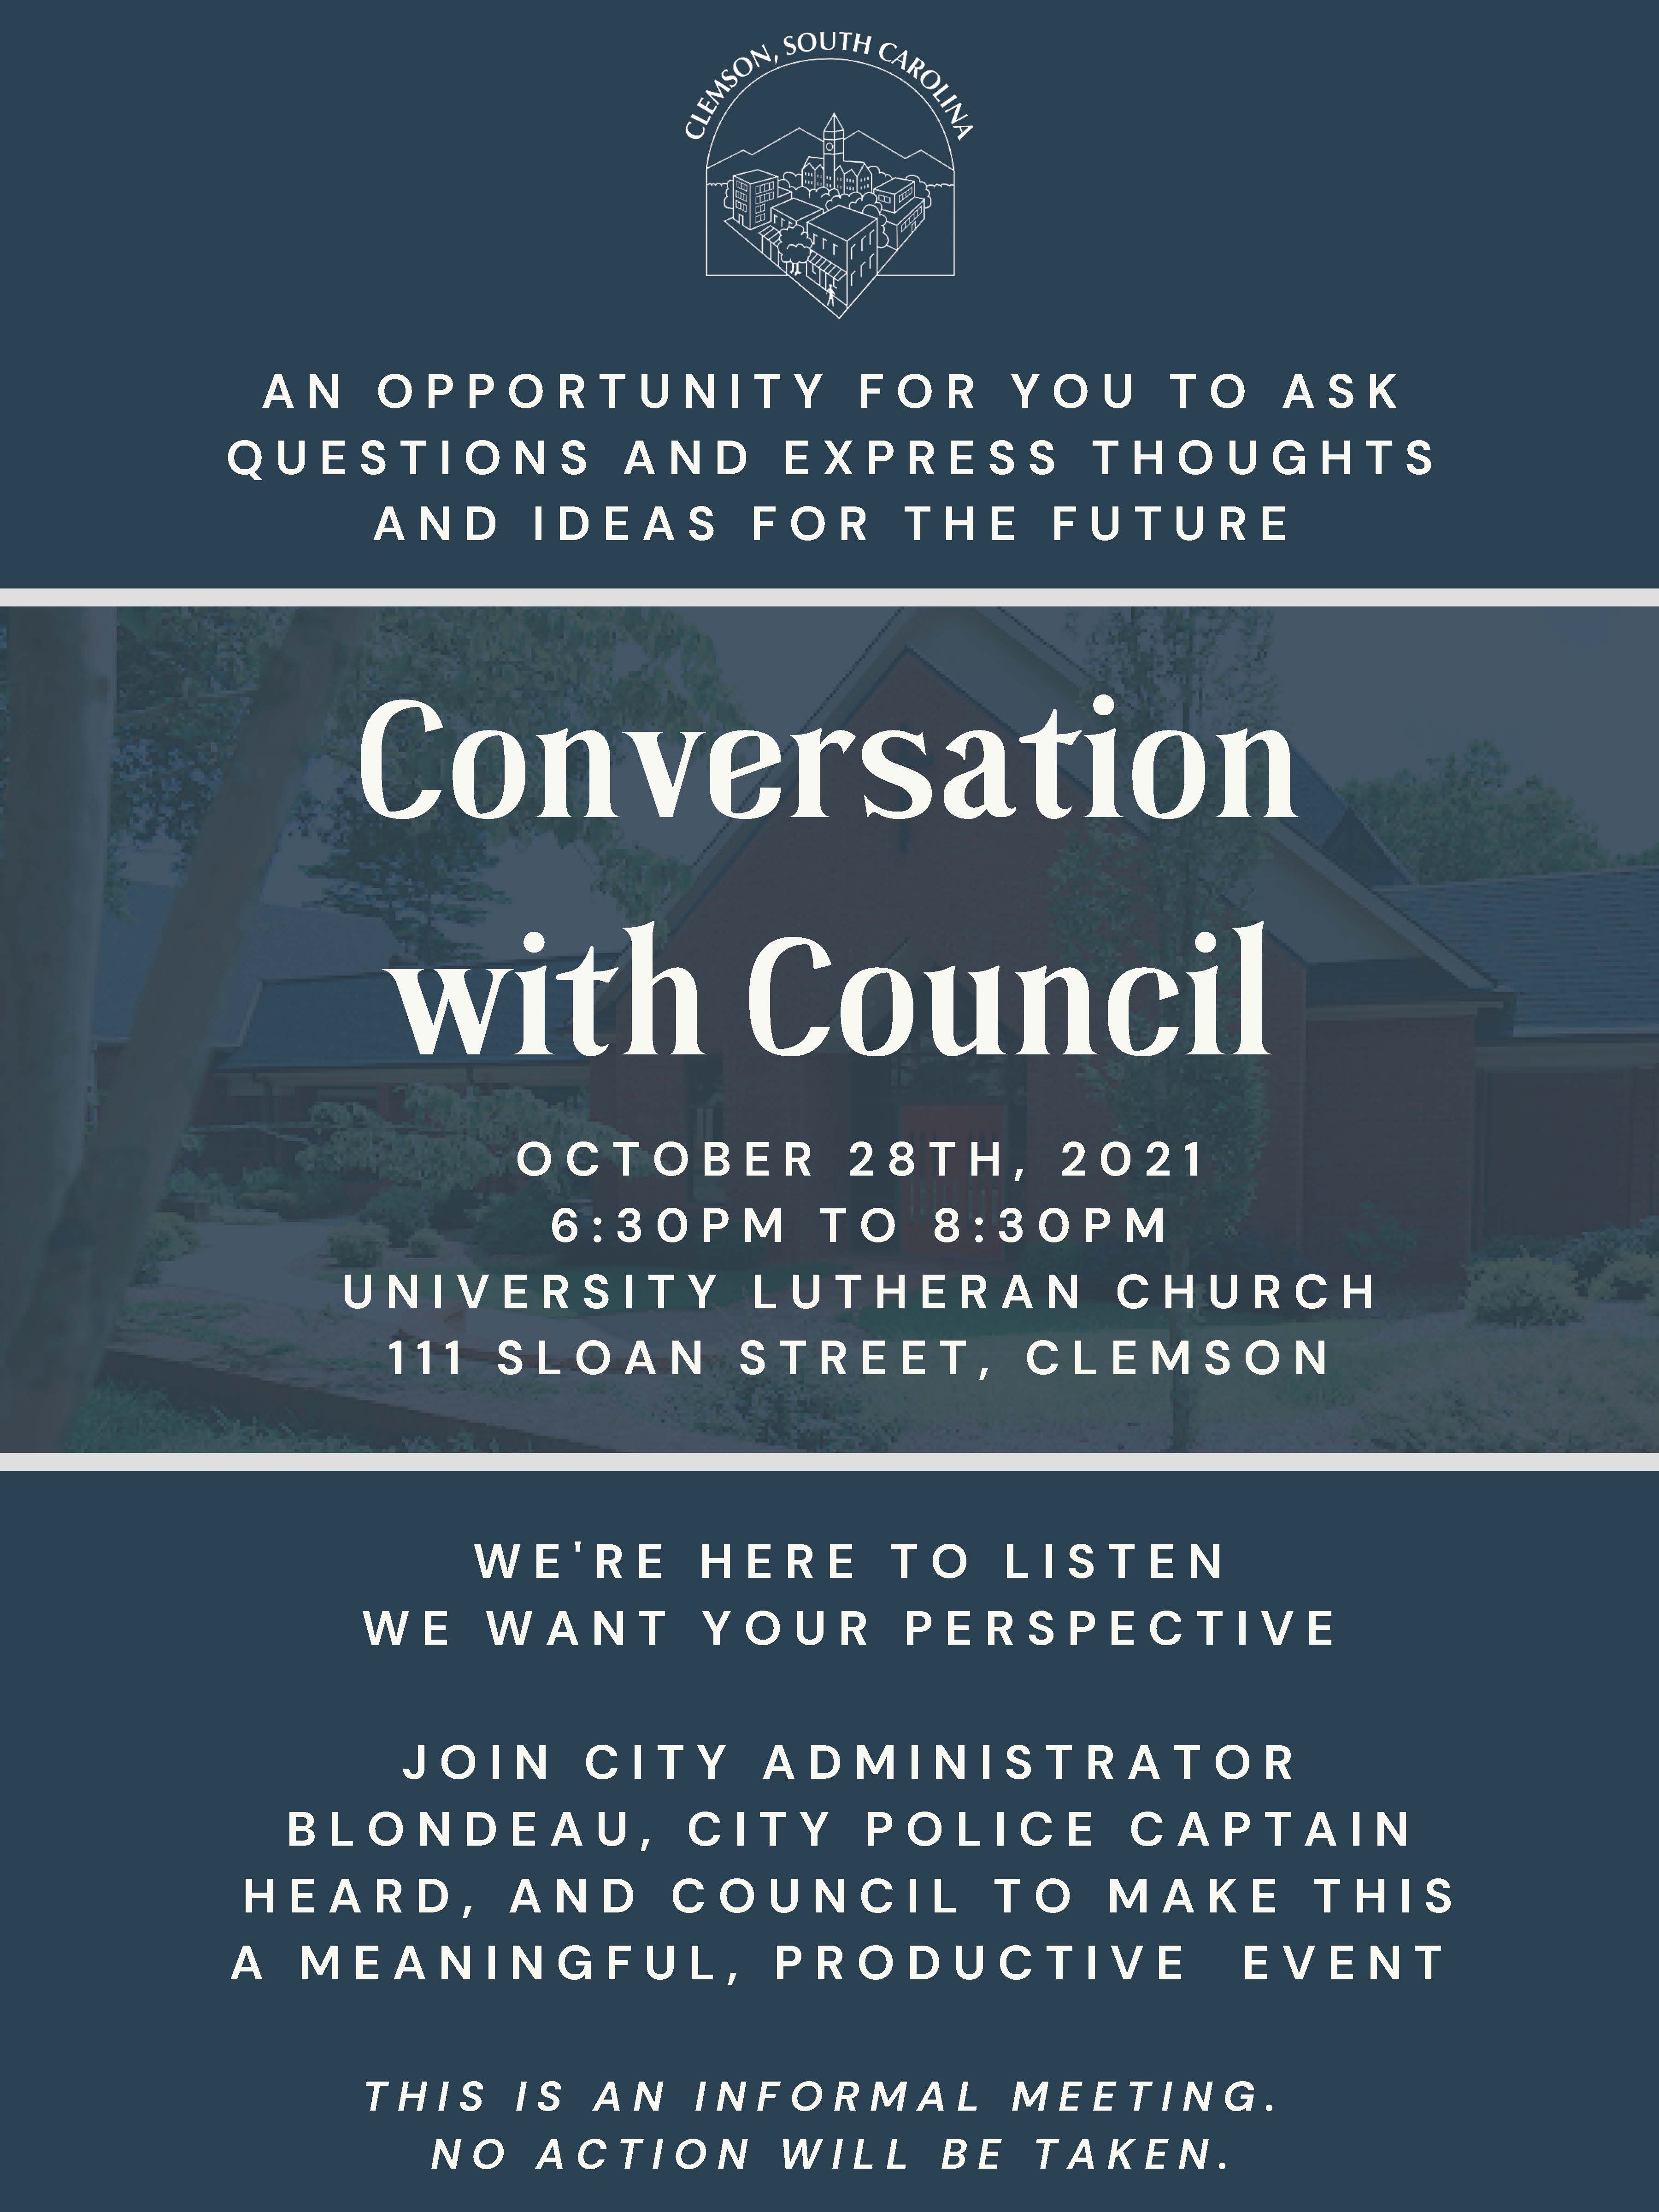 October 28 Conversations with Council at University Lutheran Church